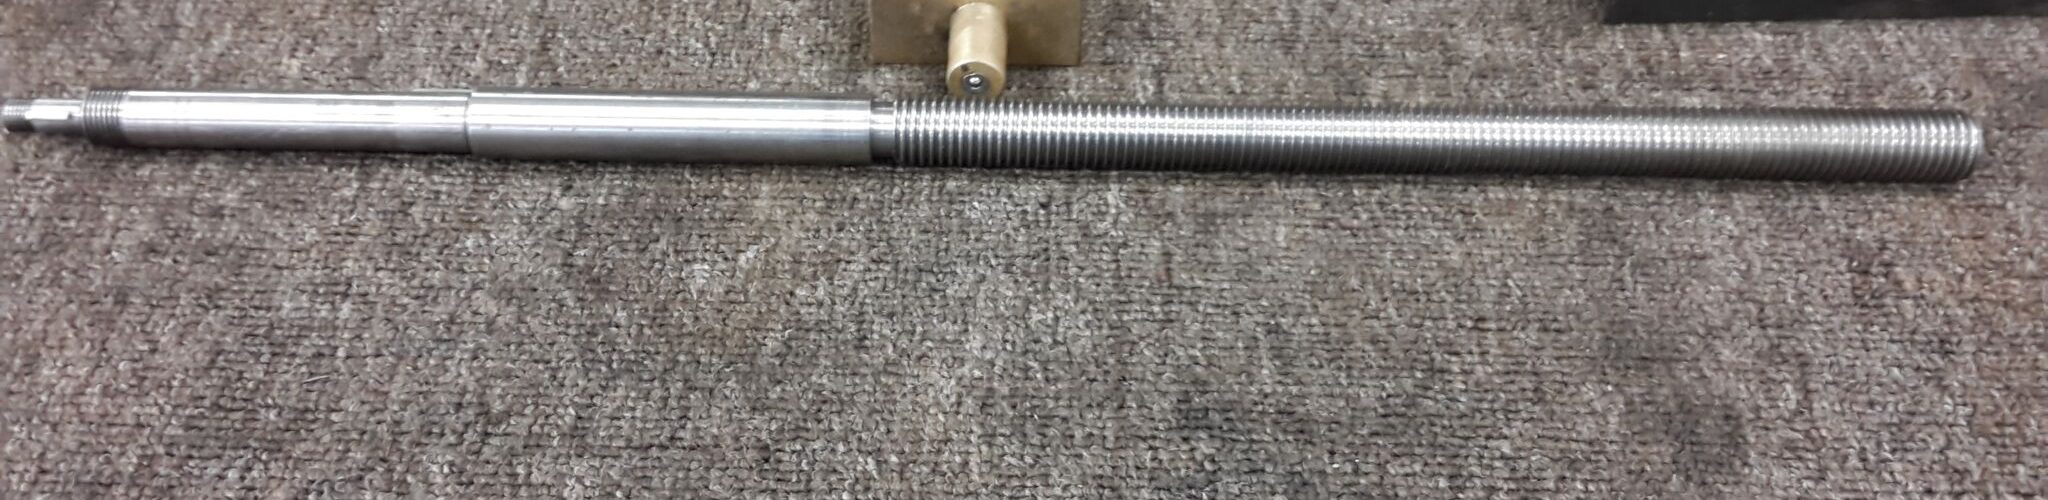 Threaded Shaft Replacement